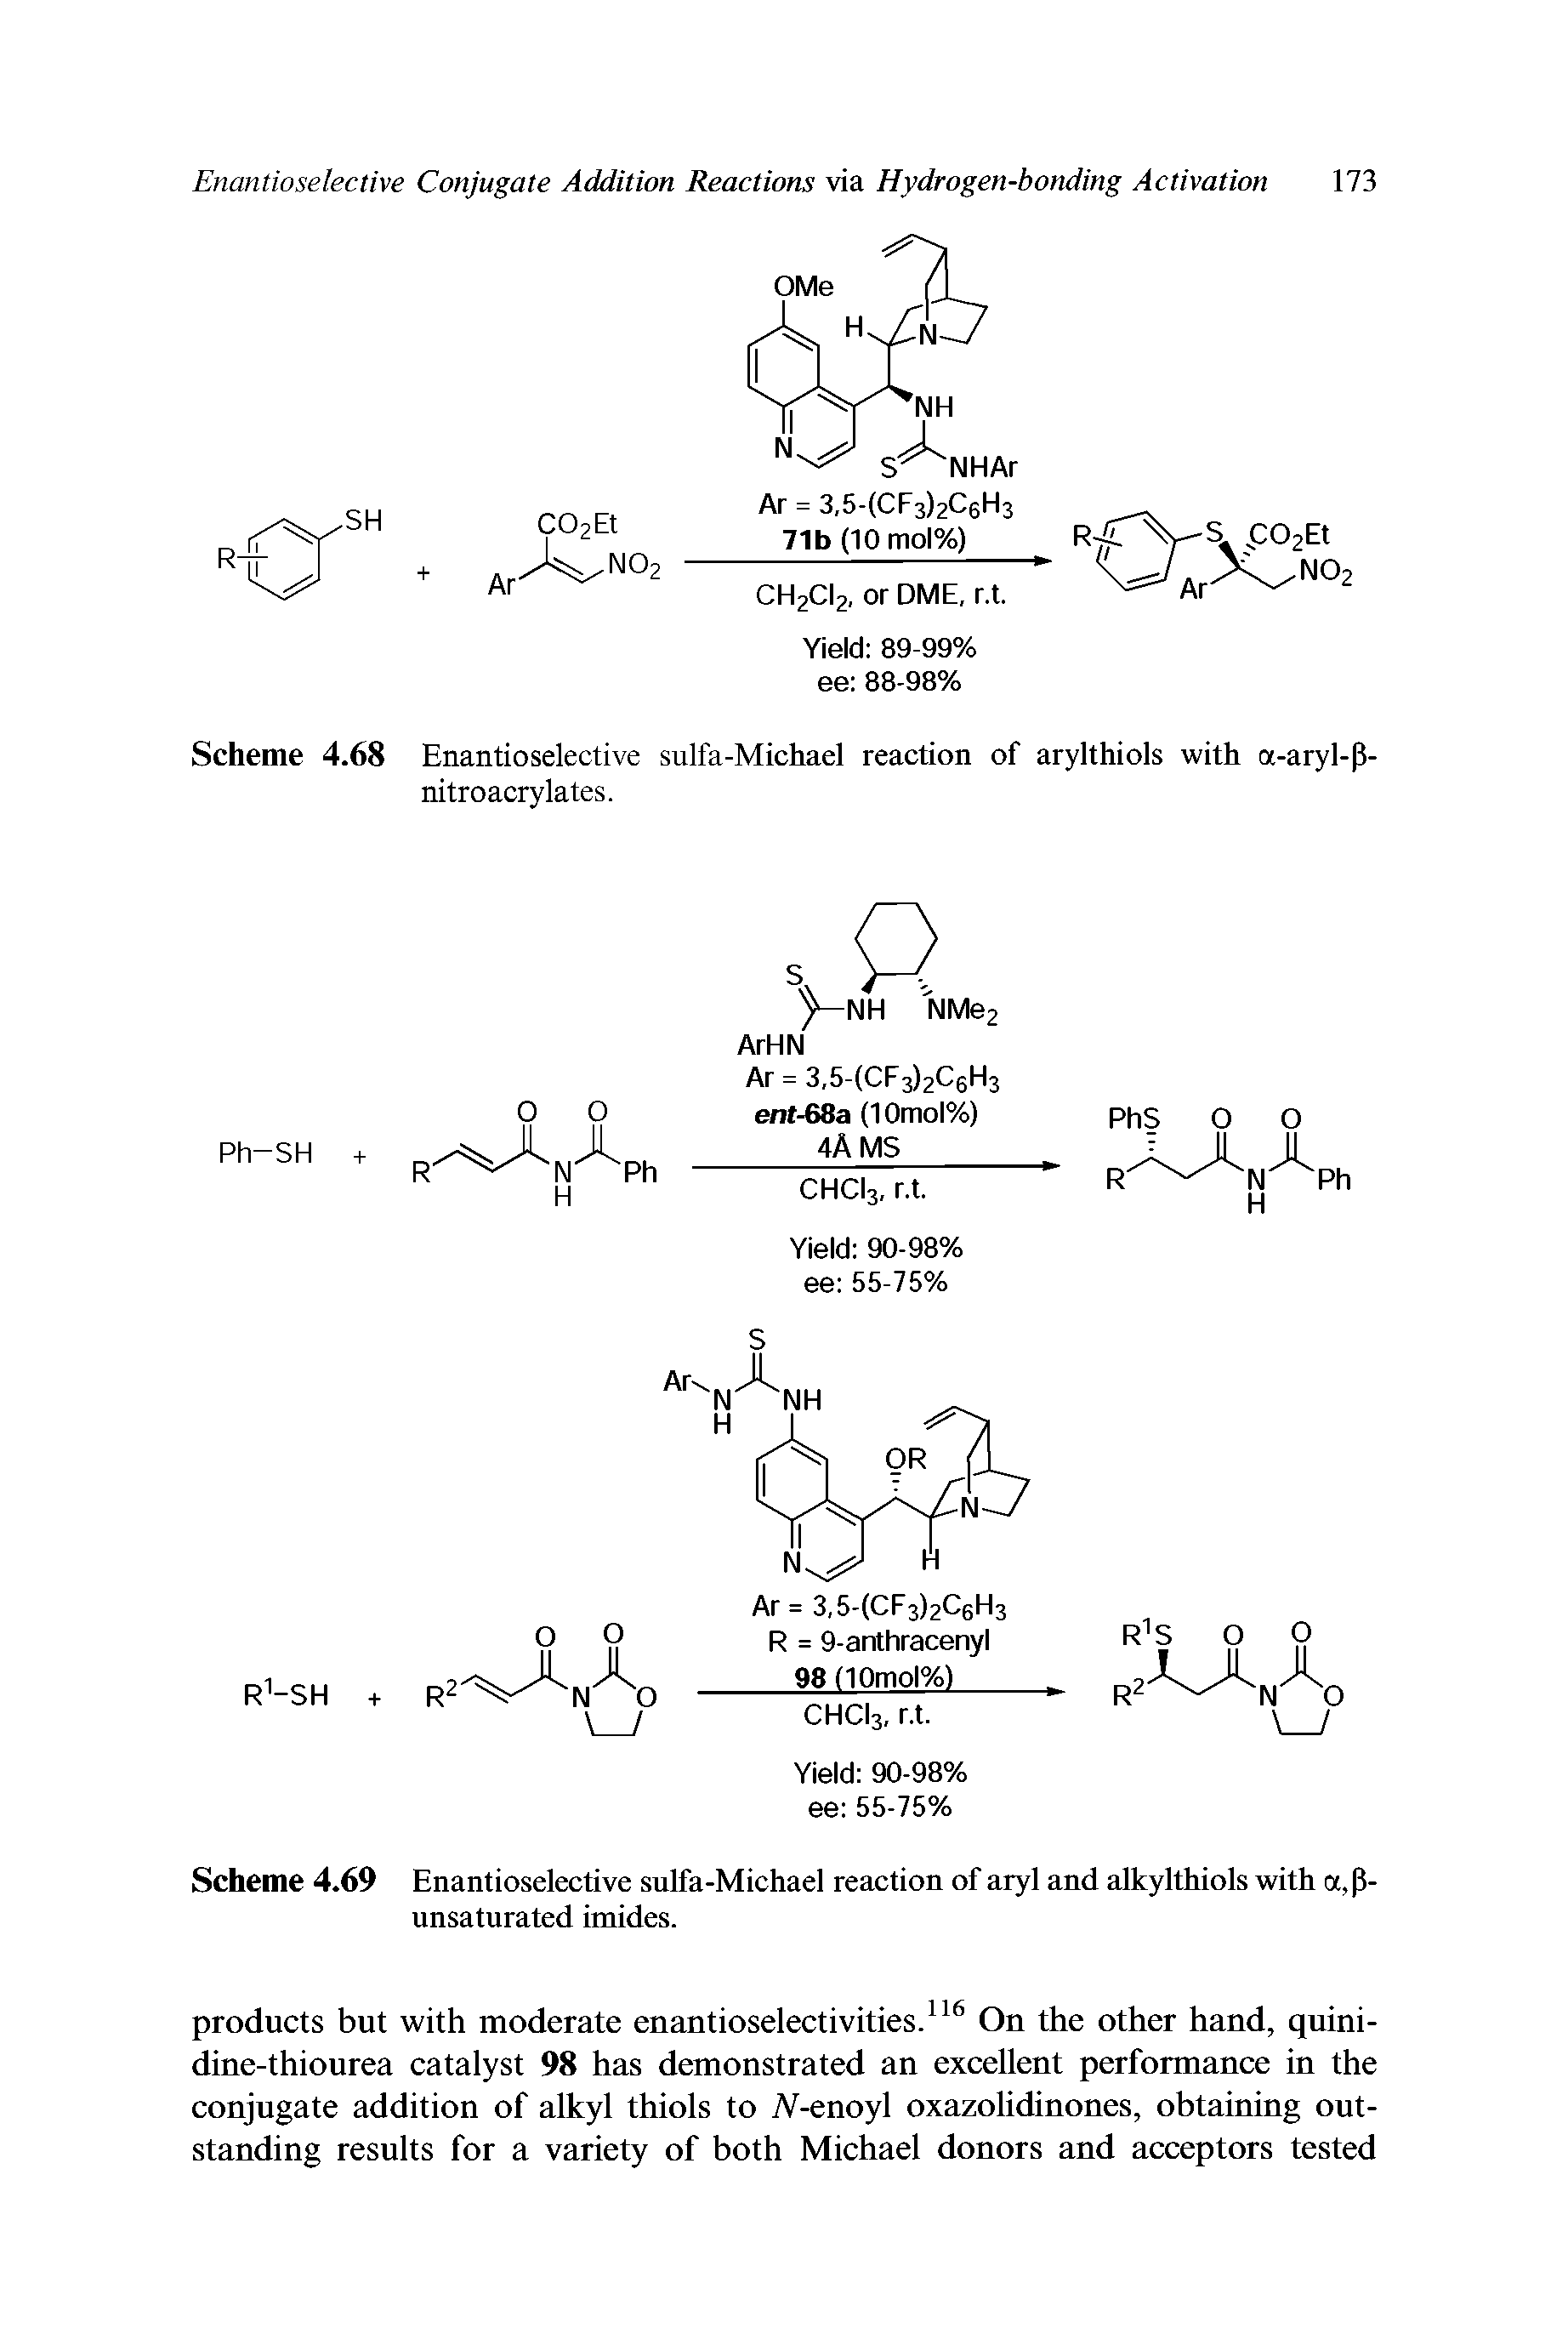 Scheme 4.69 Enantioselective sulfa-Michael reaction of aryl and alkylthiols with a,P-unsaturated imides.